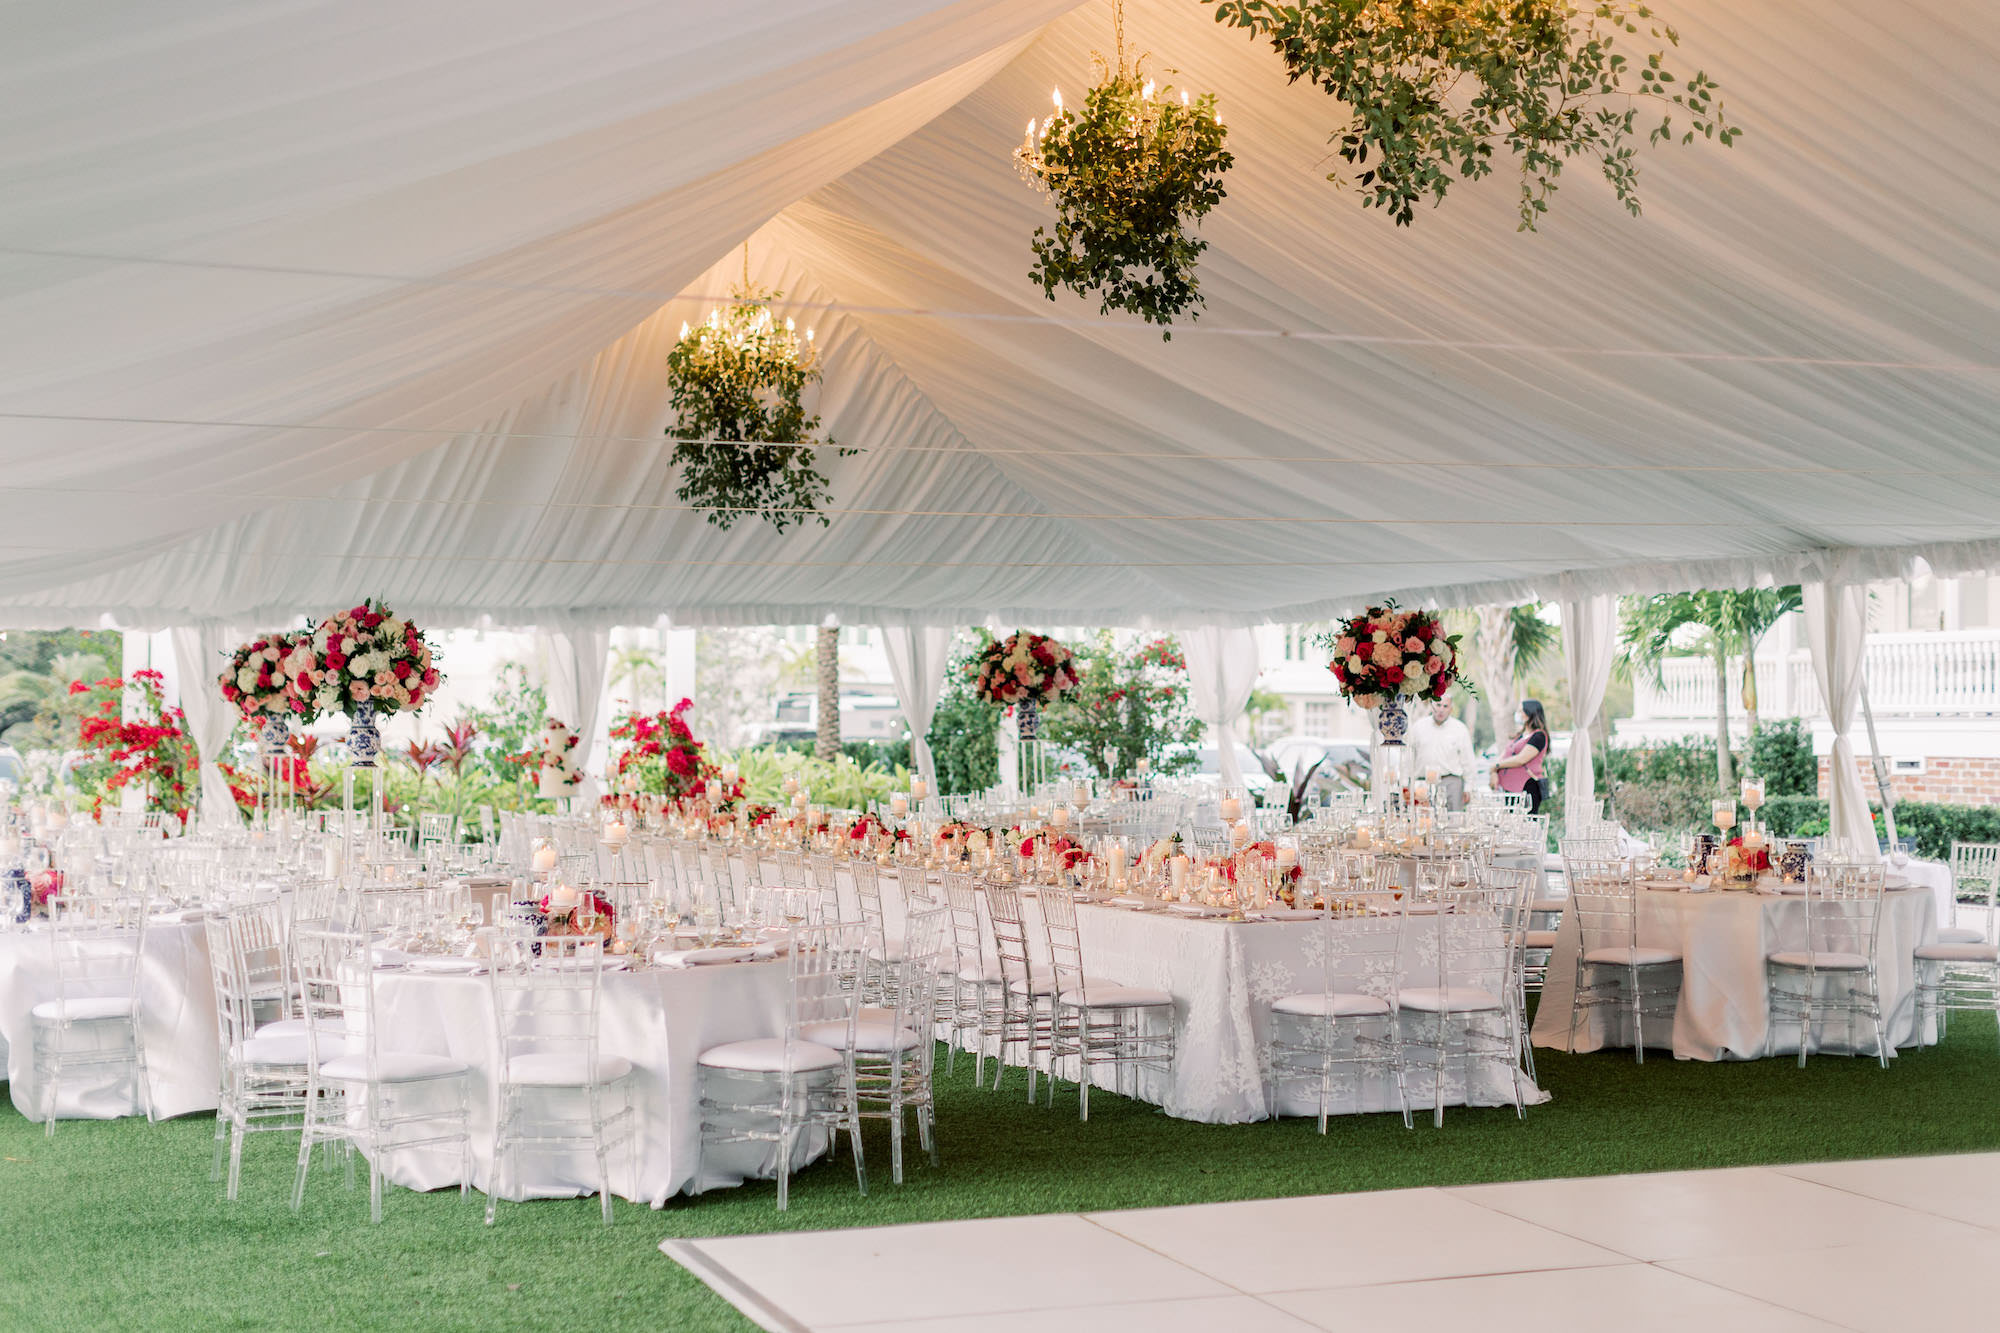 Vintage Blue and Pink Southern Classic Wedding Reception Decor, Outdoor White Tent, Long Feasting Tables, Clear Acrylic Chiavari Chairs, Greenery Hanging Chandeliers | Tampa Bay Wedding Planner Parties A'la Carte | Wedding Rentals Gabro Event Services | Over the Top Rental Linens